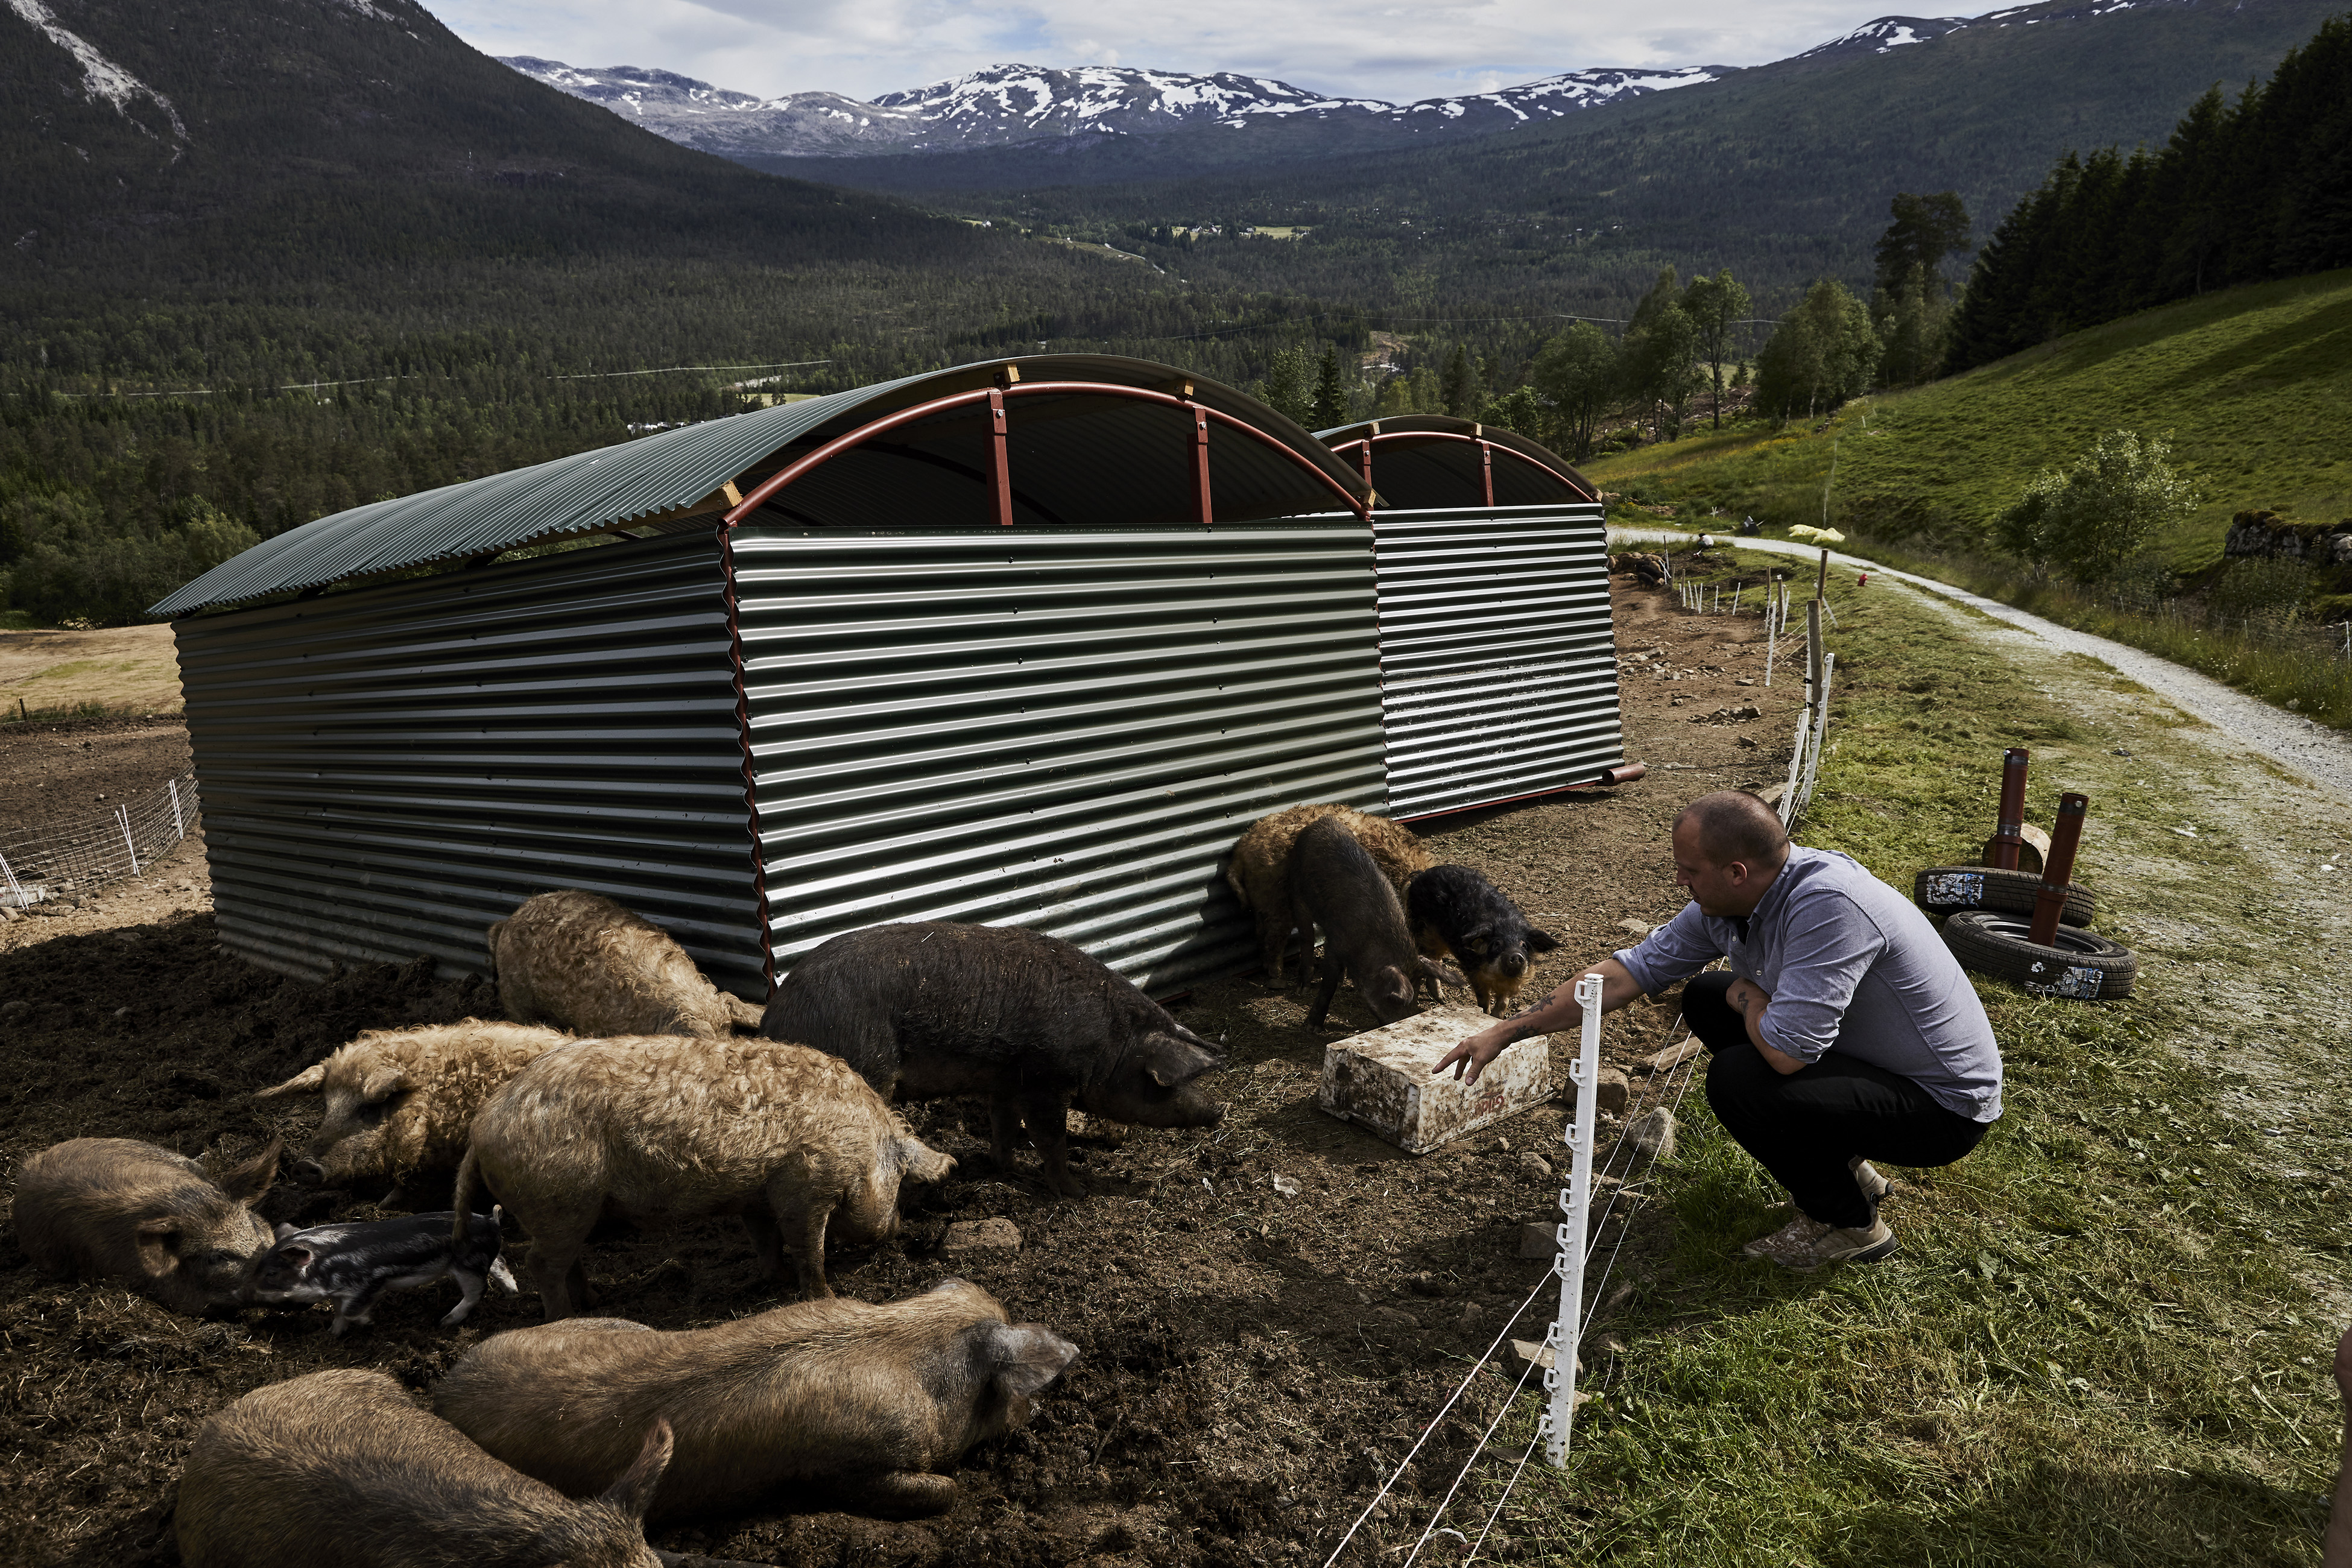 Christopher Haatuft with pigs at a farm in Voss, Norway, that supplies pork for his restaurant Lysverket in Bergen, July, 2017. New Nordic chefs are guided by solemn manifestoes about nature and culture, and often restrict themselves to Scandinavian ingredients. Haatuft, who is the opposite of solemn, coined a new term for the food at his restaurant: neo-fjordic. (David B. Torch/The New York Times)